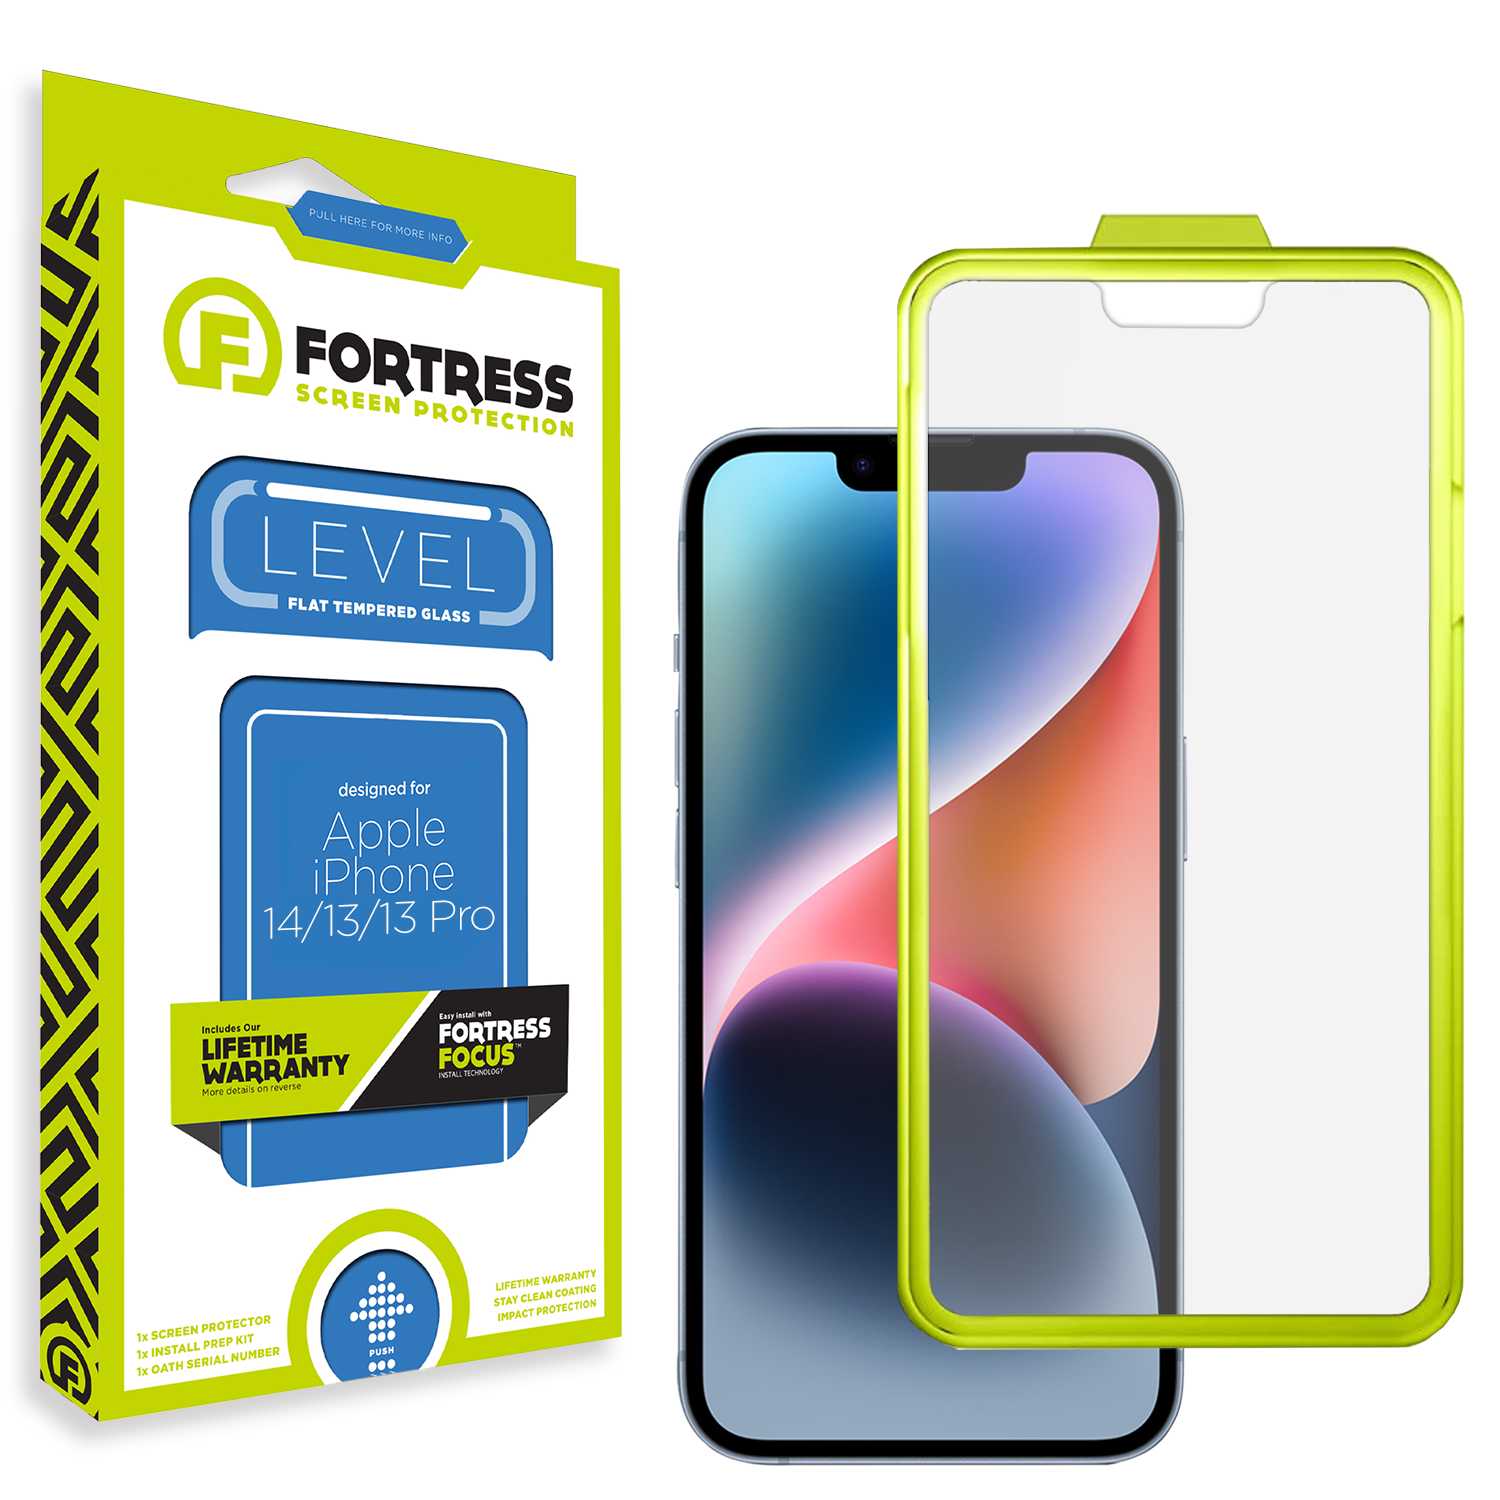 Fortress iPhone 13 Pro Screen Protector $0CoverageInstallTool Scooch Screen Protector